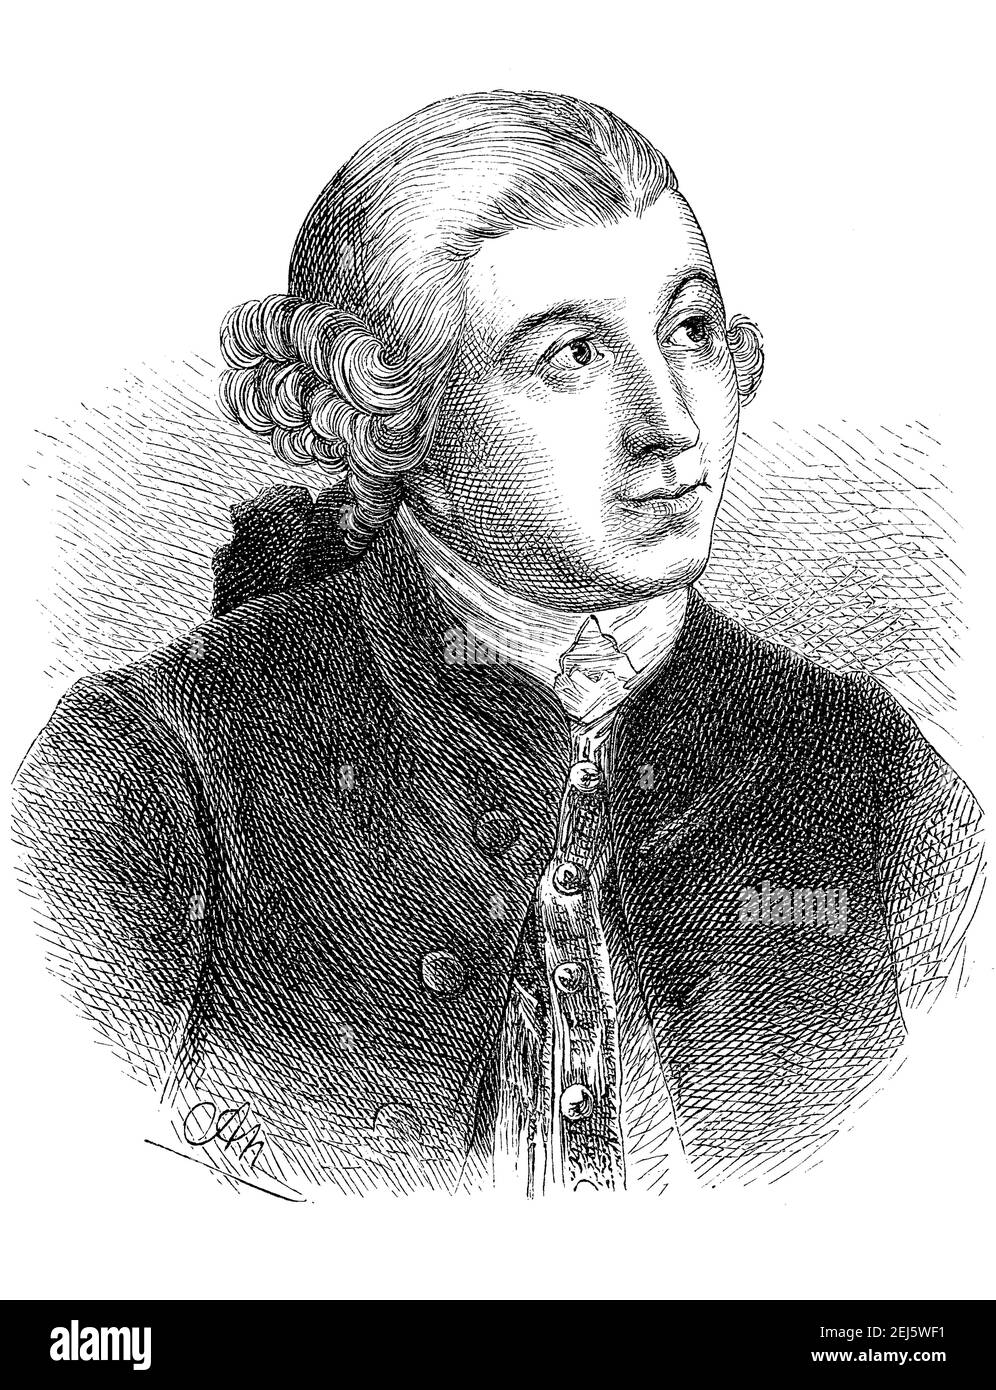 David Garrick, February 19, 1717 - January 20, 1779, was a famous actor of the 18th century, the Age of Enlightenment  /  David Garrick, 19. Februar 1717 - 20. Januar 1779, war ein beruehmter Schauspieler des 18. Jahrhunderts, des Zeitalters der Aufklaerung, Historisch, historical, digital improved reproduction of an original from the 19th century / digitale Reproduktion einer Originalvorlage aus dem 19. Jahrhundert, Stock Photo